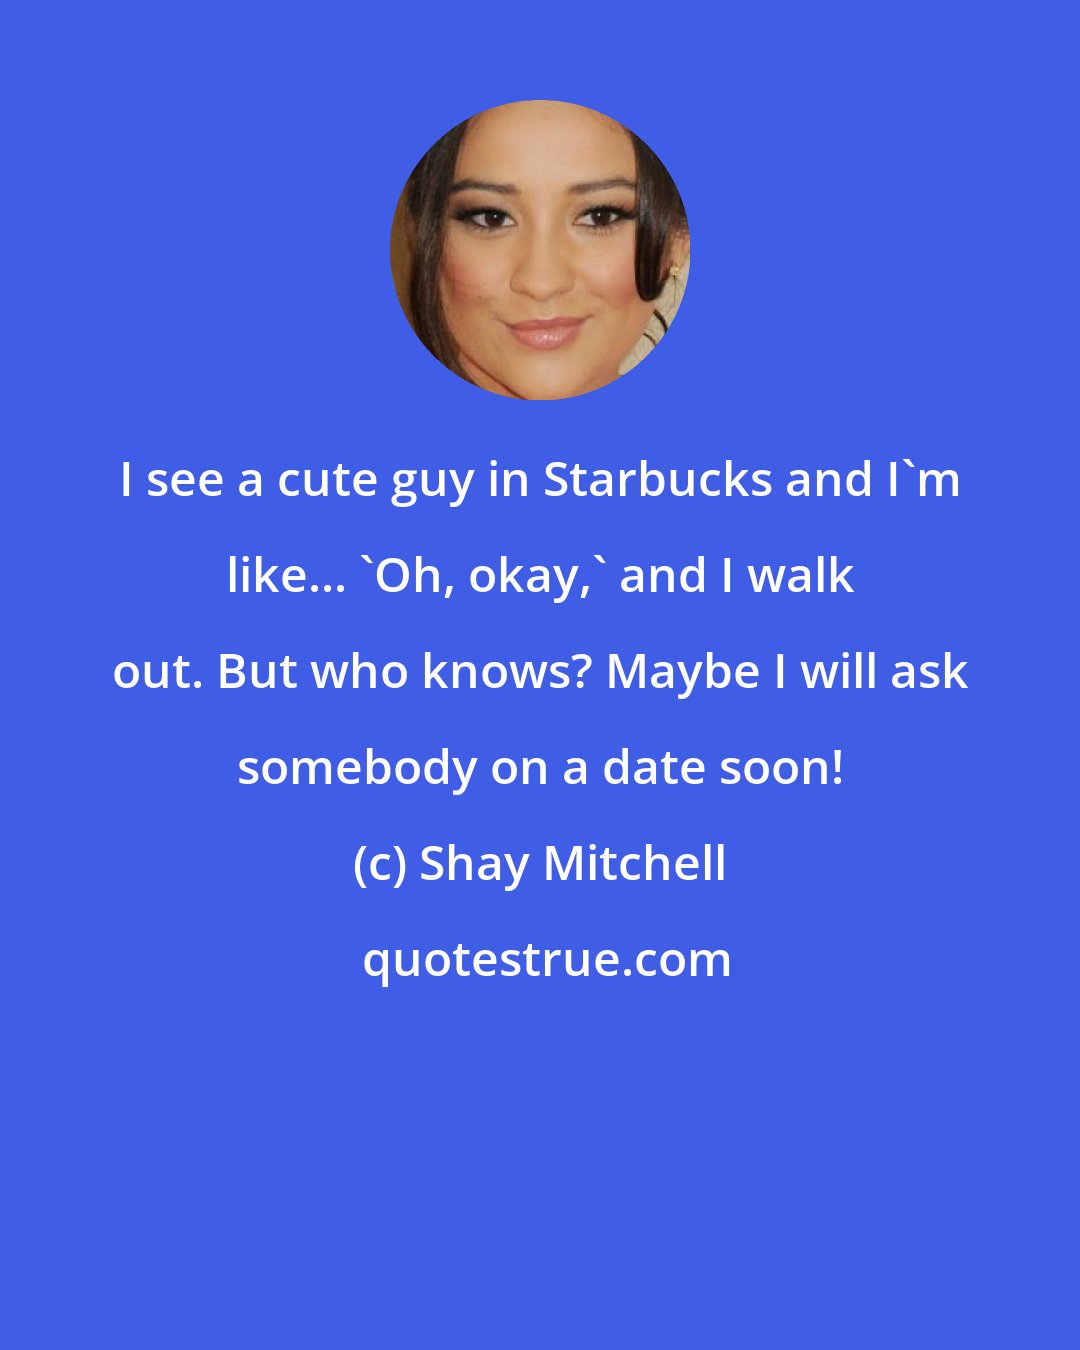 Shay Mitchell: I see a cute guy in Starbucks and I'm like... 'Oh, okay,' and I walk out. But who knows? Maybe I will ask somebody on a date soon!